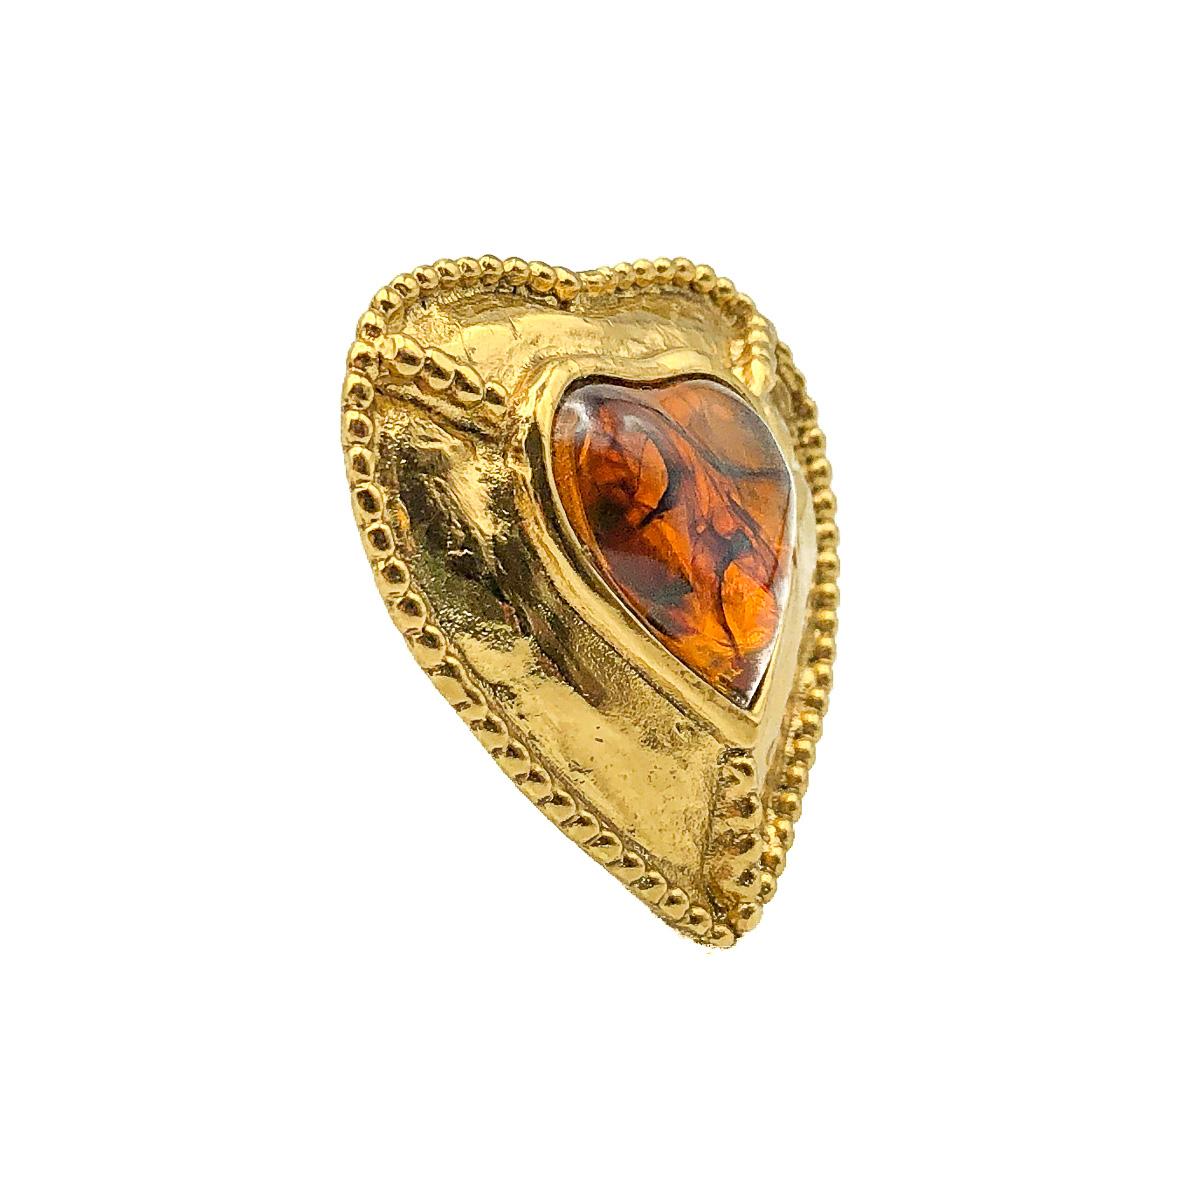 A wonderful Yves Saint Laurent Heart Pendant. Crafted in gold plated metal and set with a large amber style resin heart. The heart, the symbol of the House of Yves Saint Laurent since the 1960s is the most perfect expression of YSL style and design.